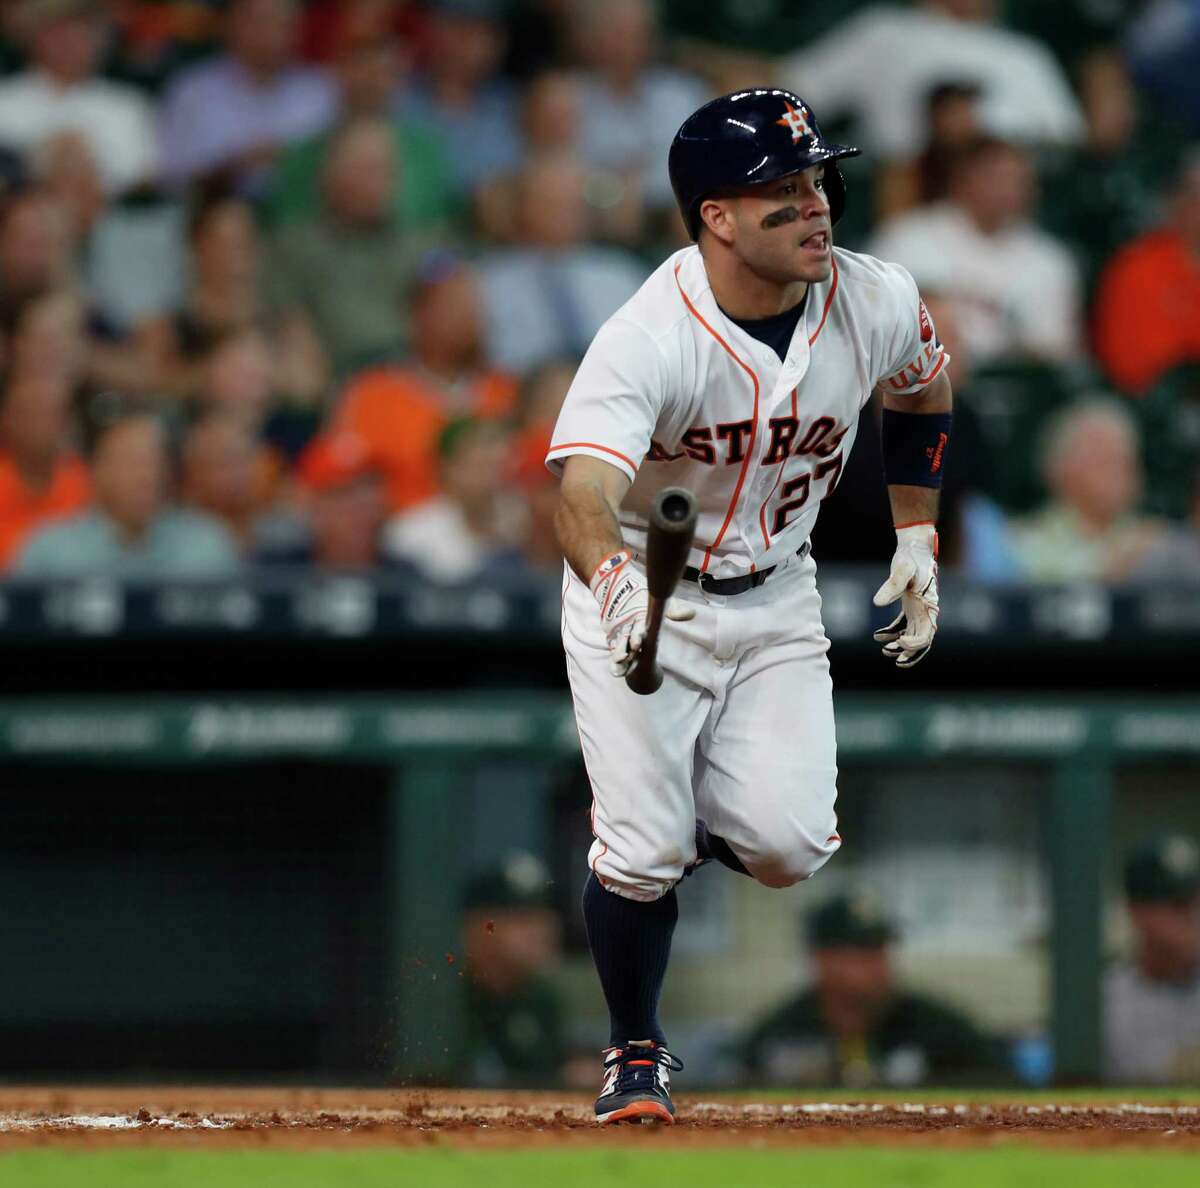 Houston Astros second baseman Jose Altuve (27) tosses his bat as he watches his ball fly out for an RBI triple, which tied the game during the eighth inning of an MLB game at Minute Maid Park, Wednesday, Aug. 31, 2016 in Houston. ( Karen Warren / Houston Chronicle )